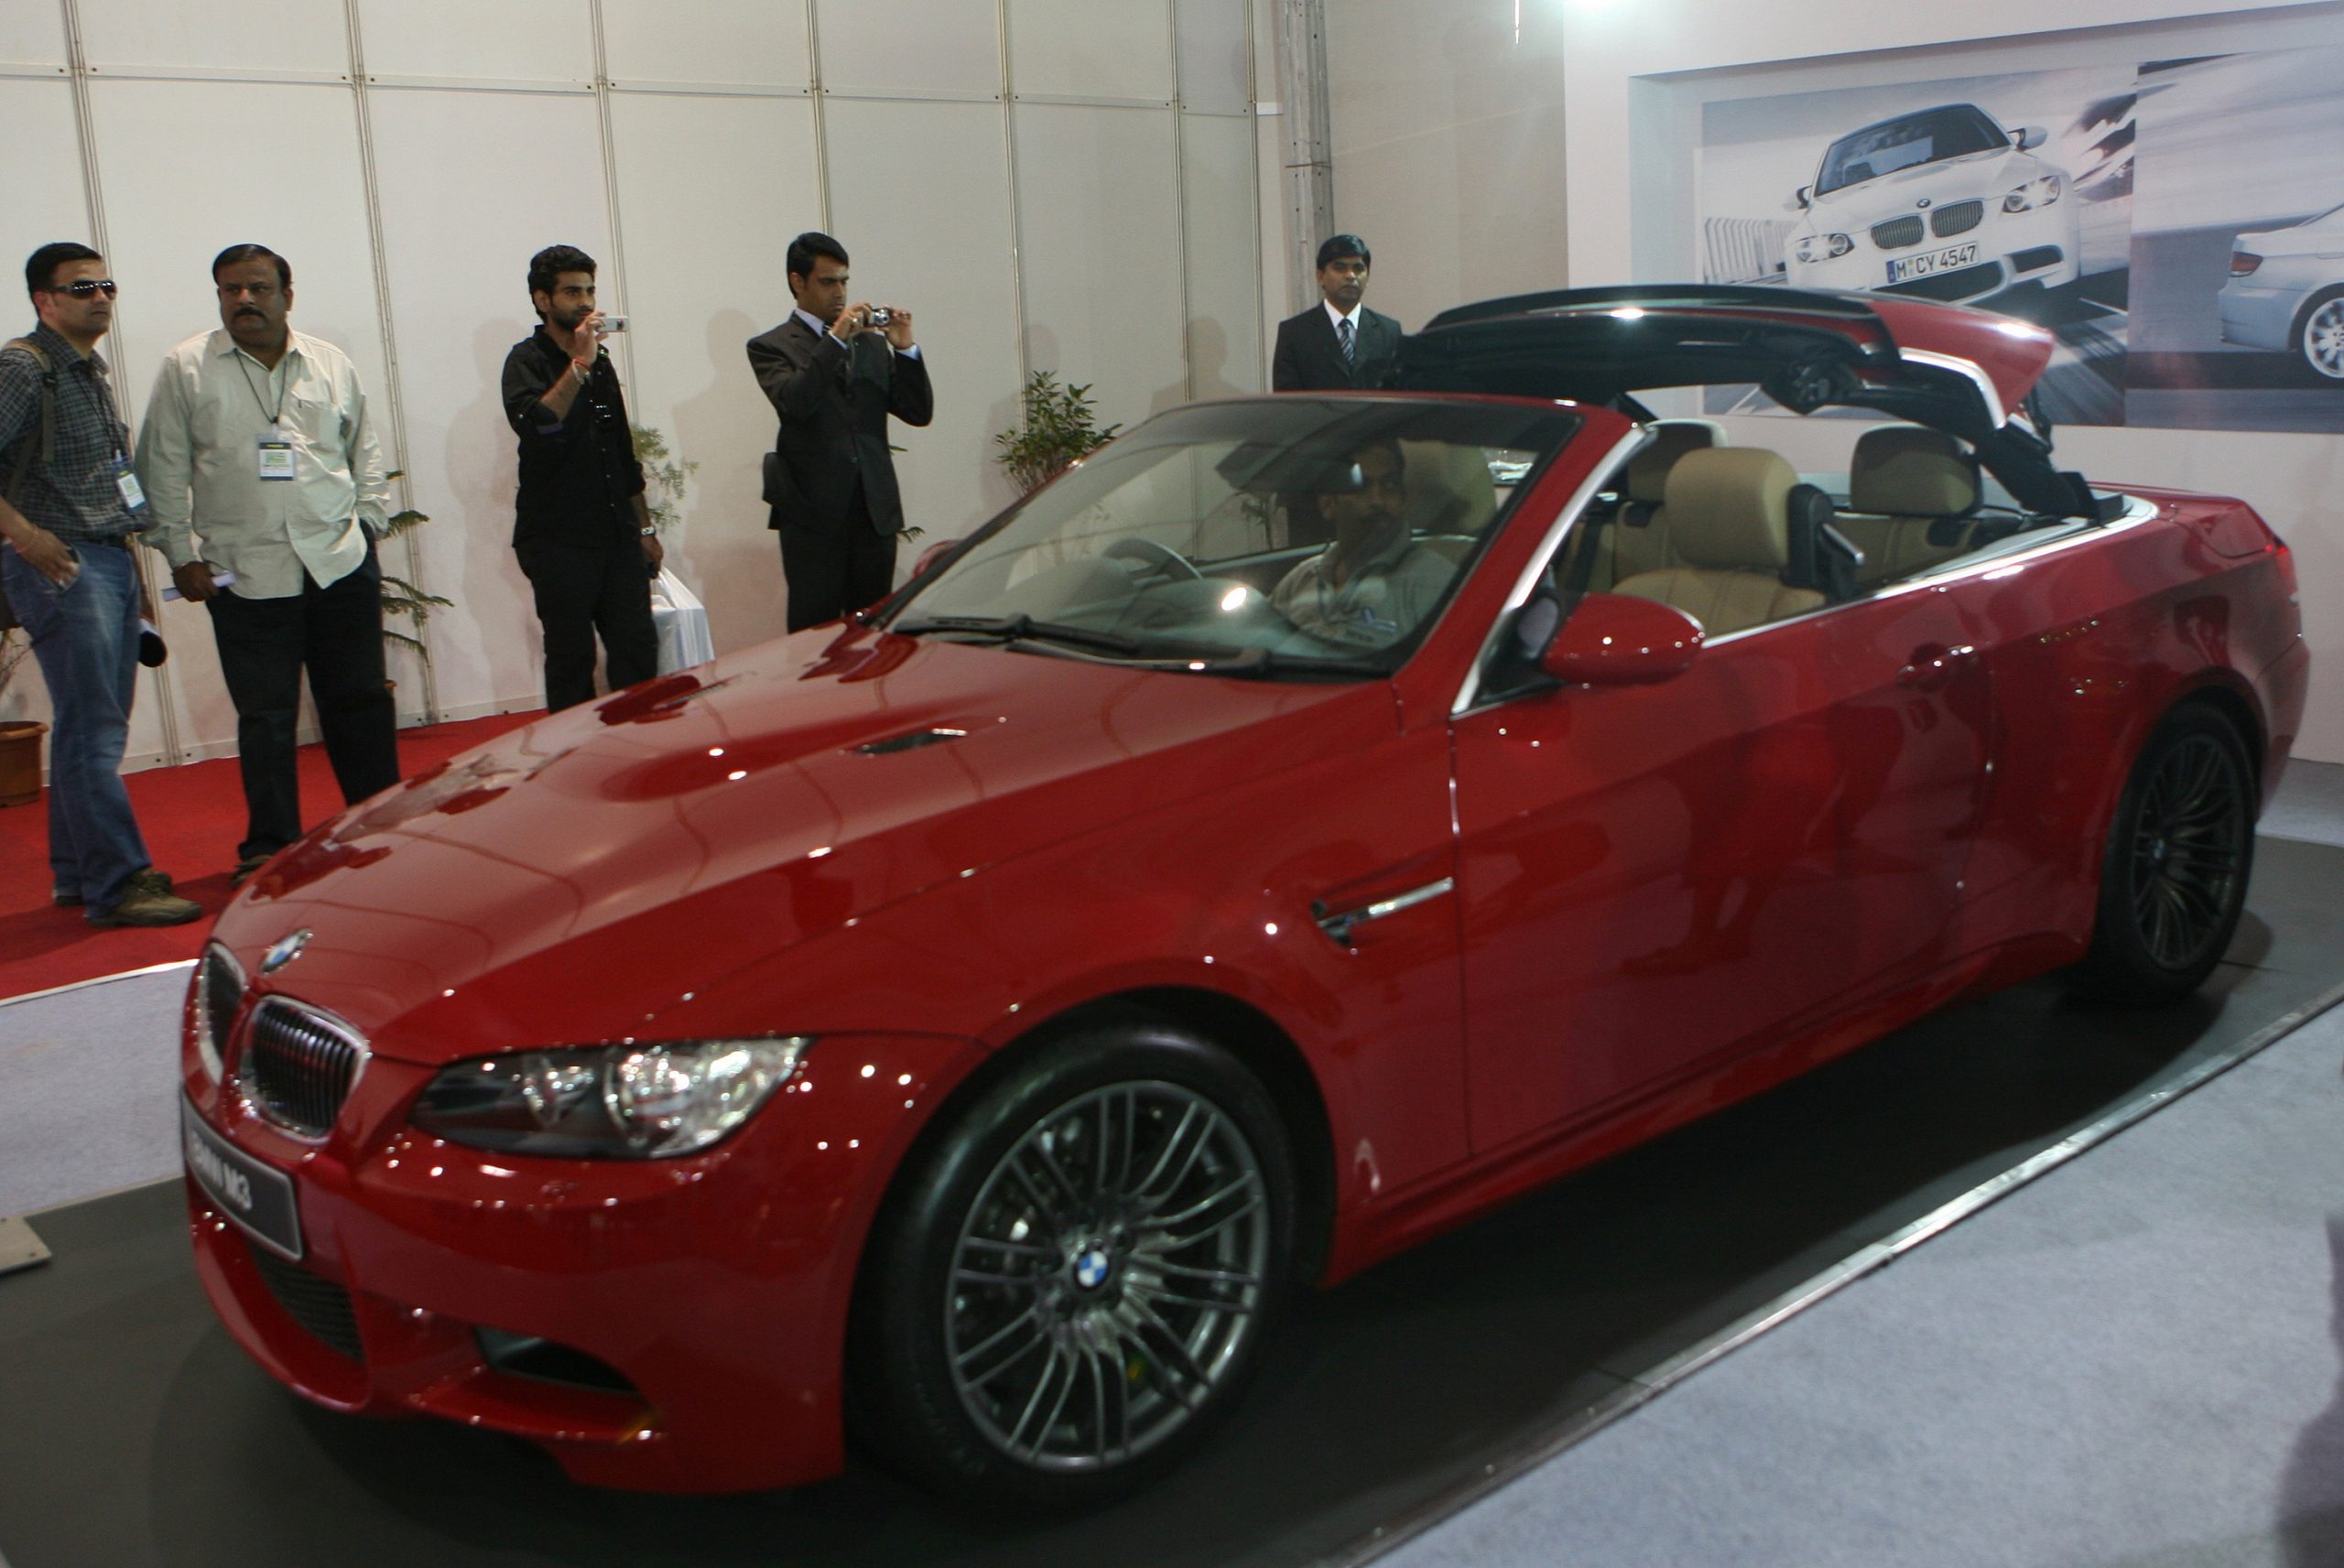 A red E92 M3 retracts its convertible top at a motor show